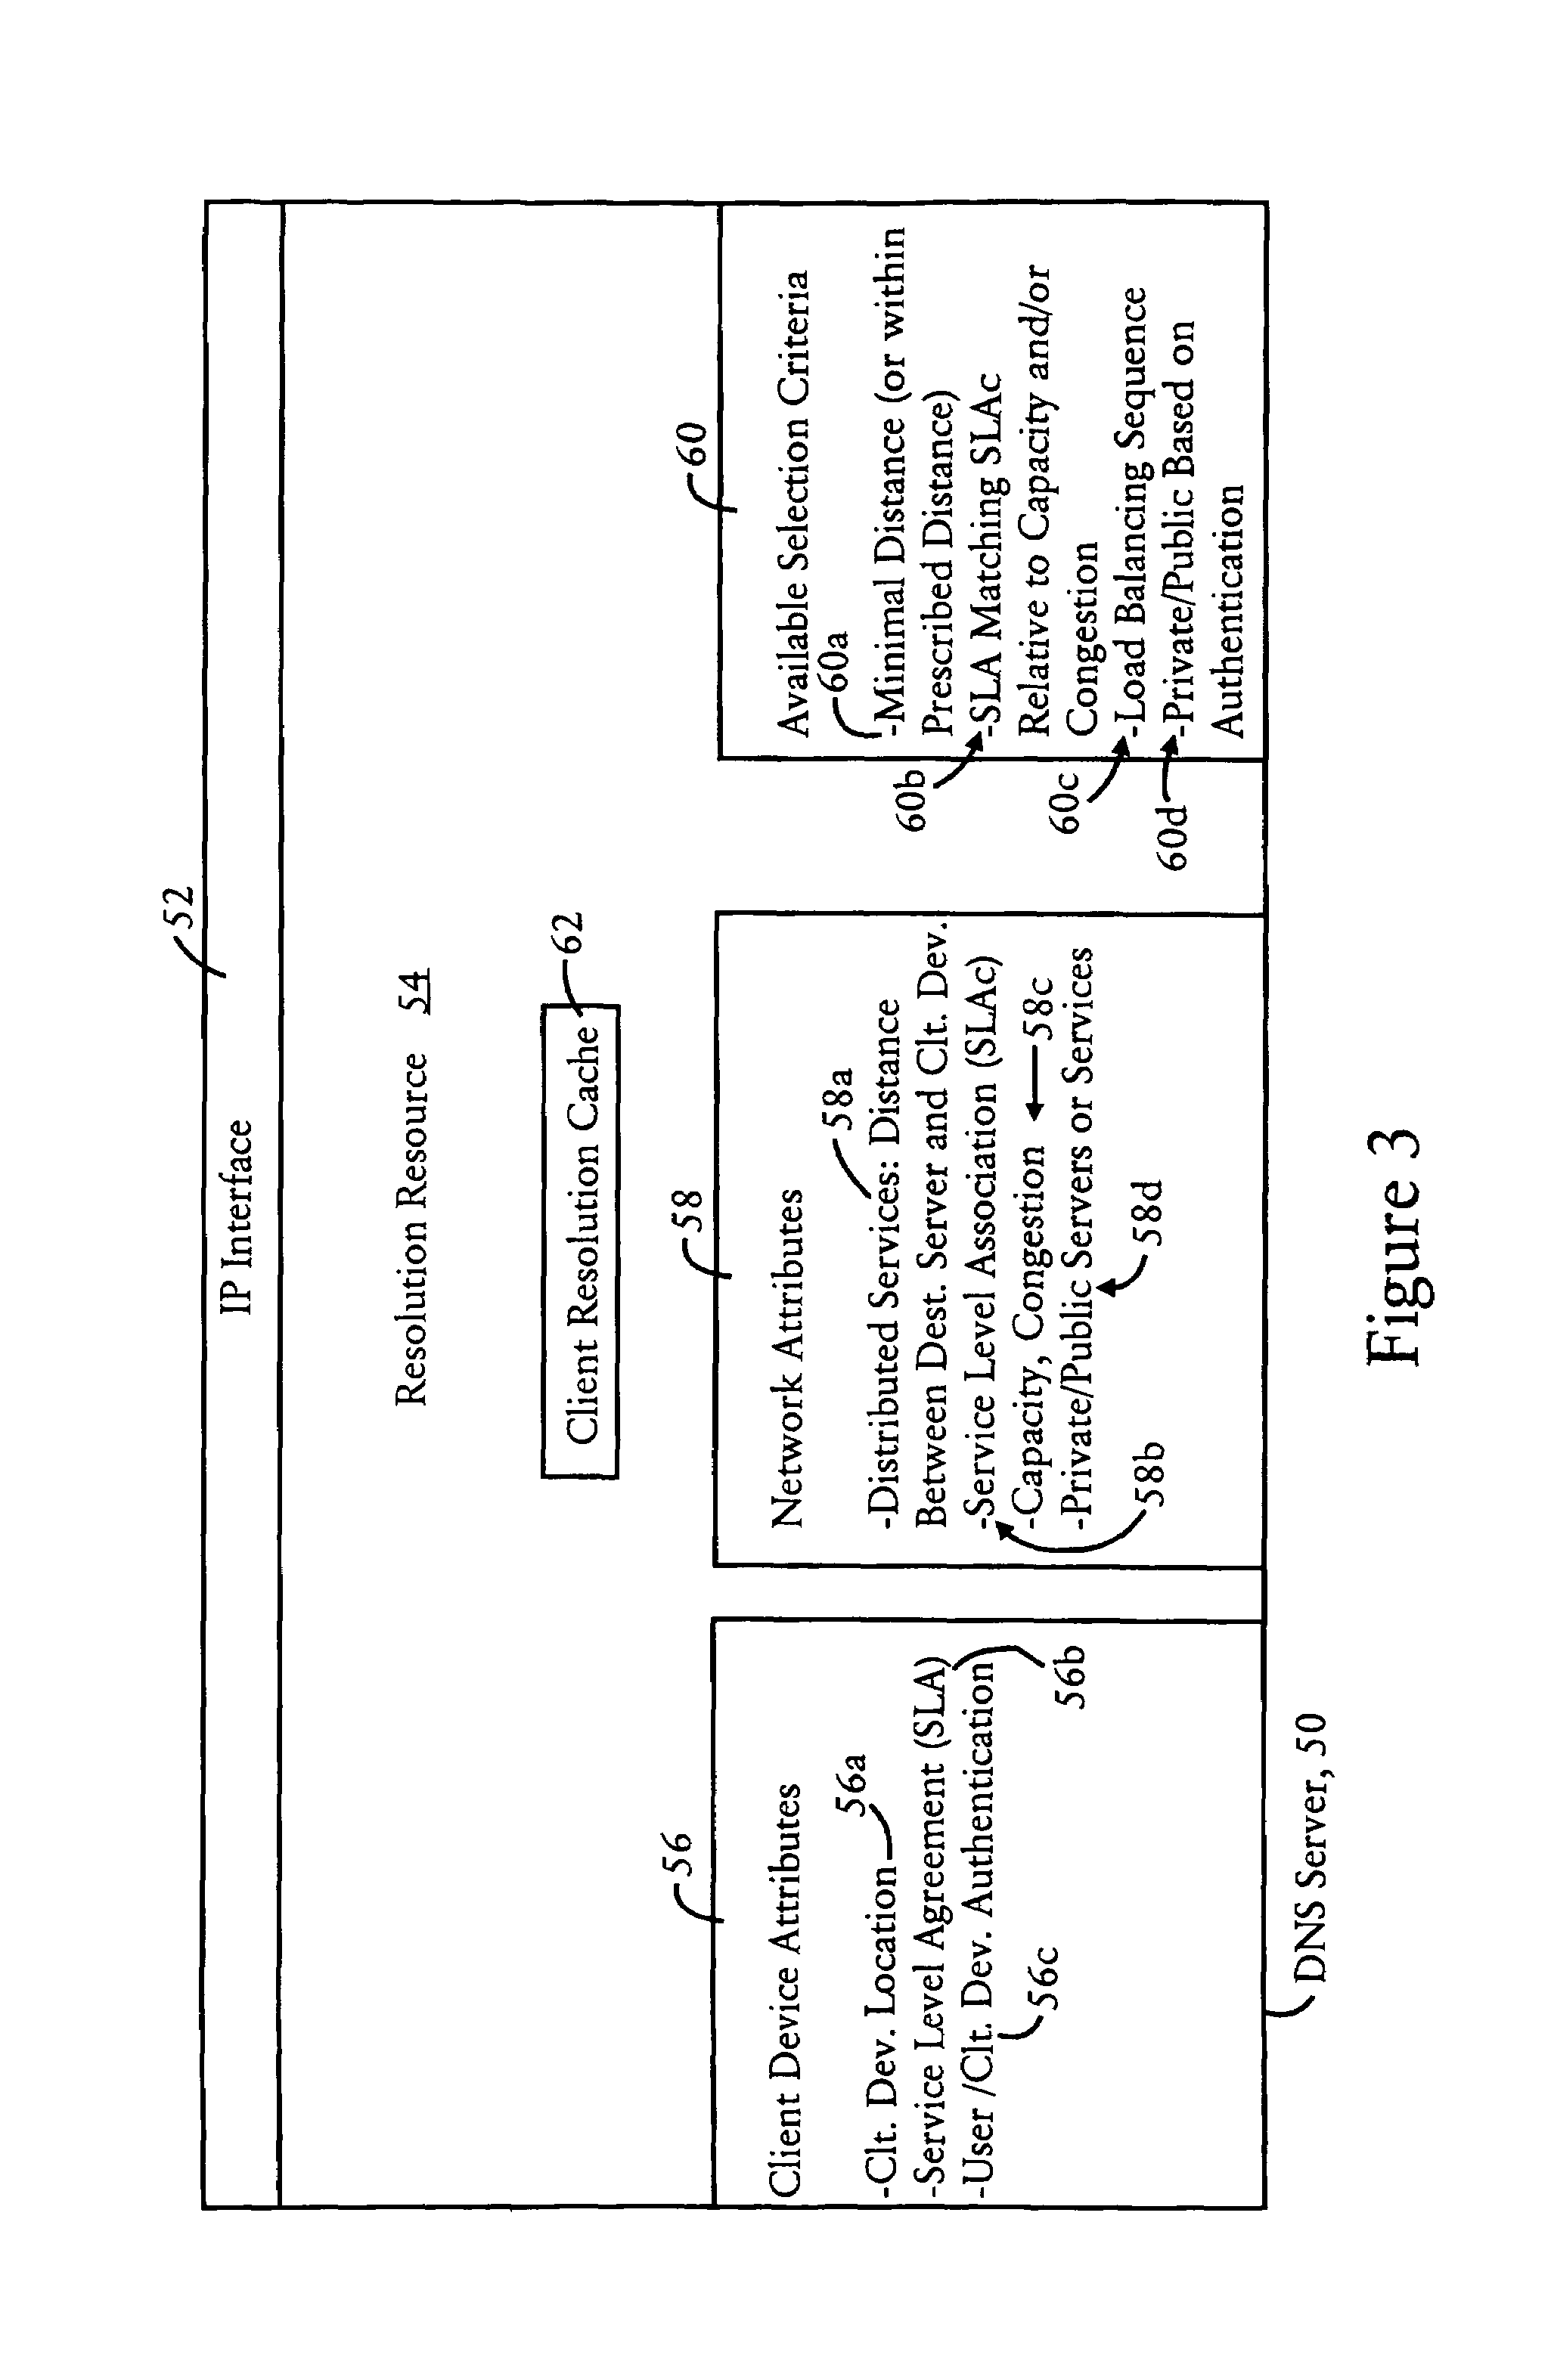 Arrangement in a server for providing dynamic domain name system services for each received request